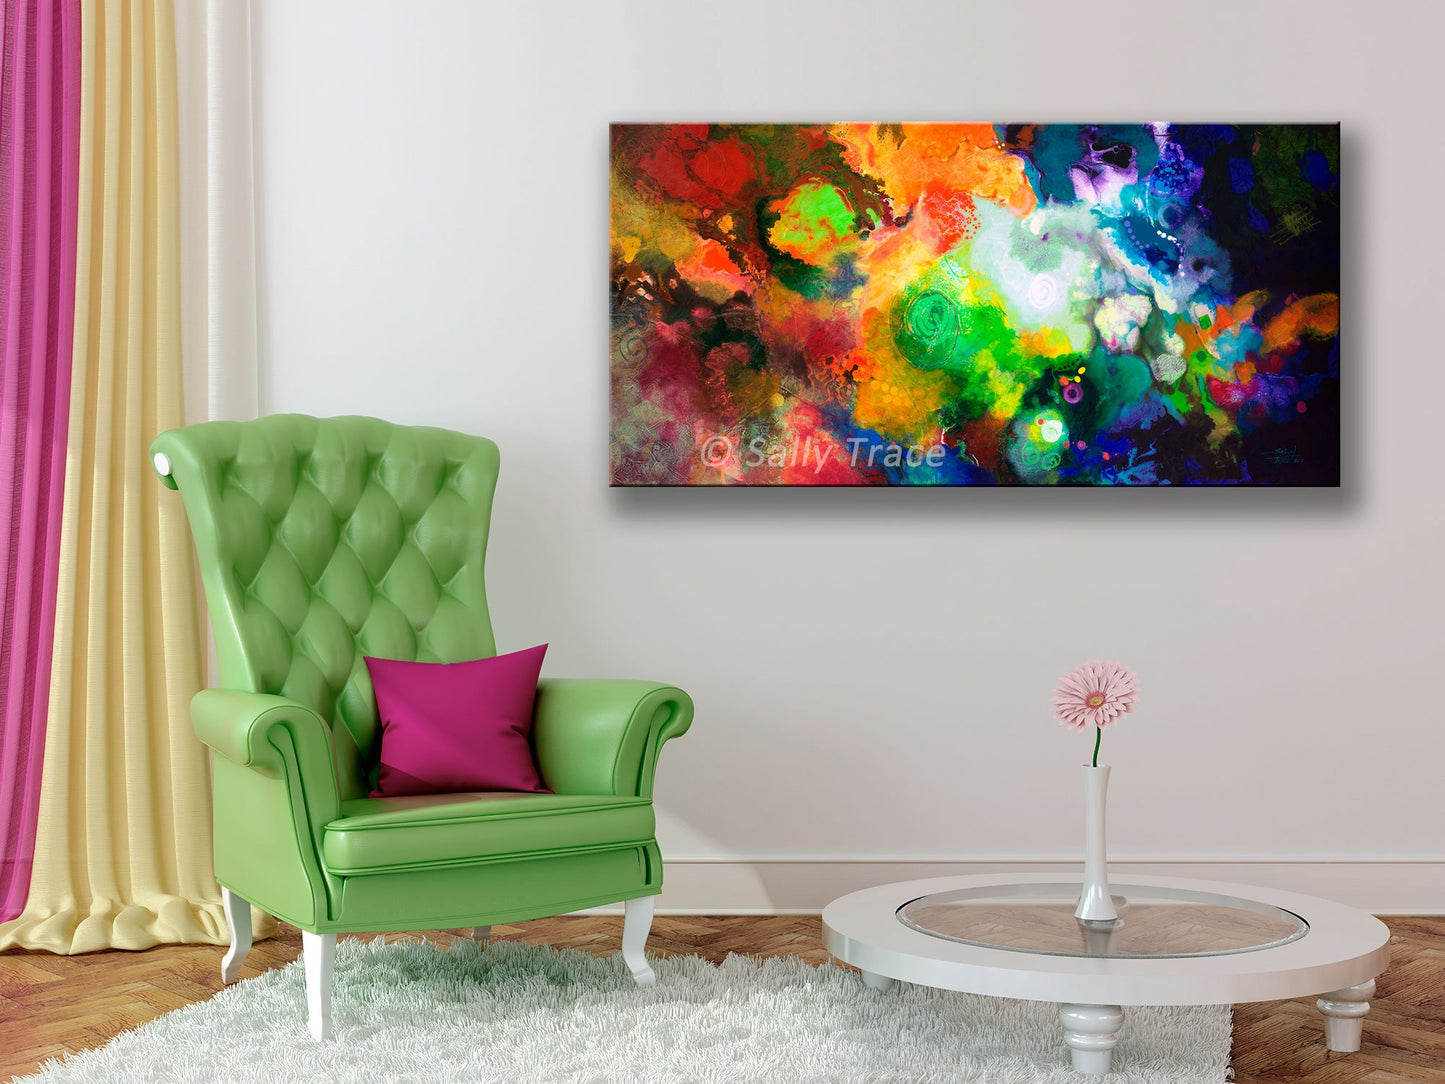 Outward Bound, fluid space art nebula painting giclee print on canvas by Sally Trace